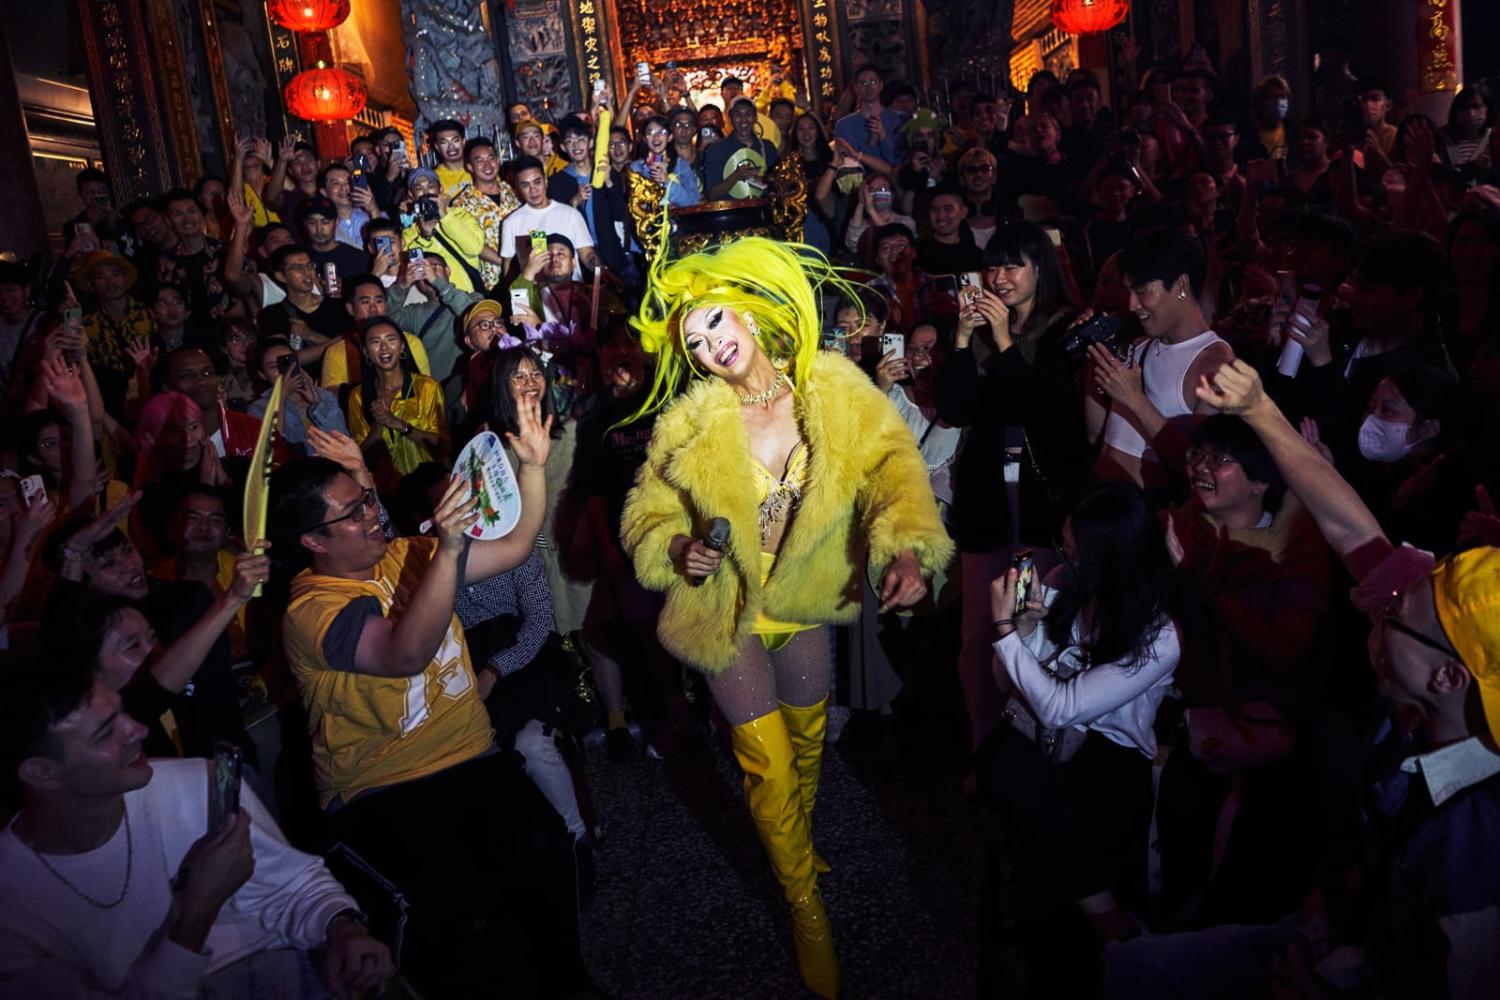 Nymphia Wind, winner of America’s Next Drag Superstar, performing at Fu Yong Gong temple in the Beitou District of Taipei last October (An Rong Xu/The Washington Post via Getty Images)